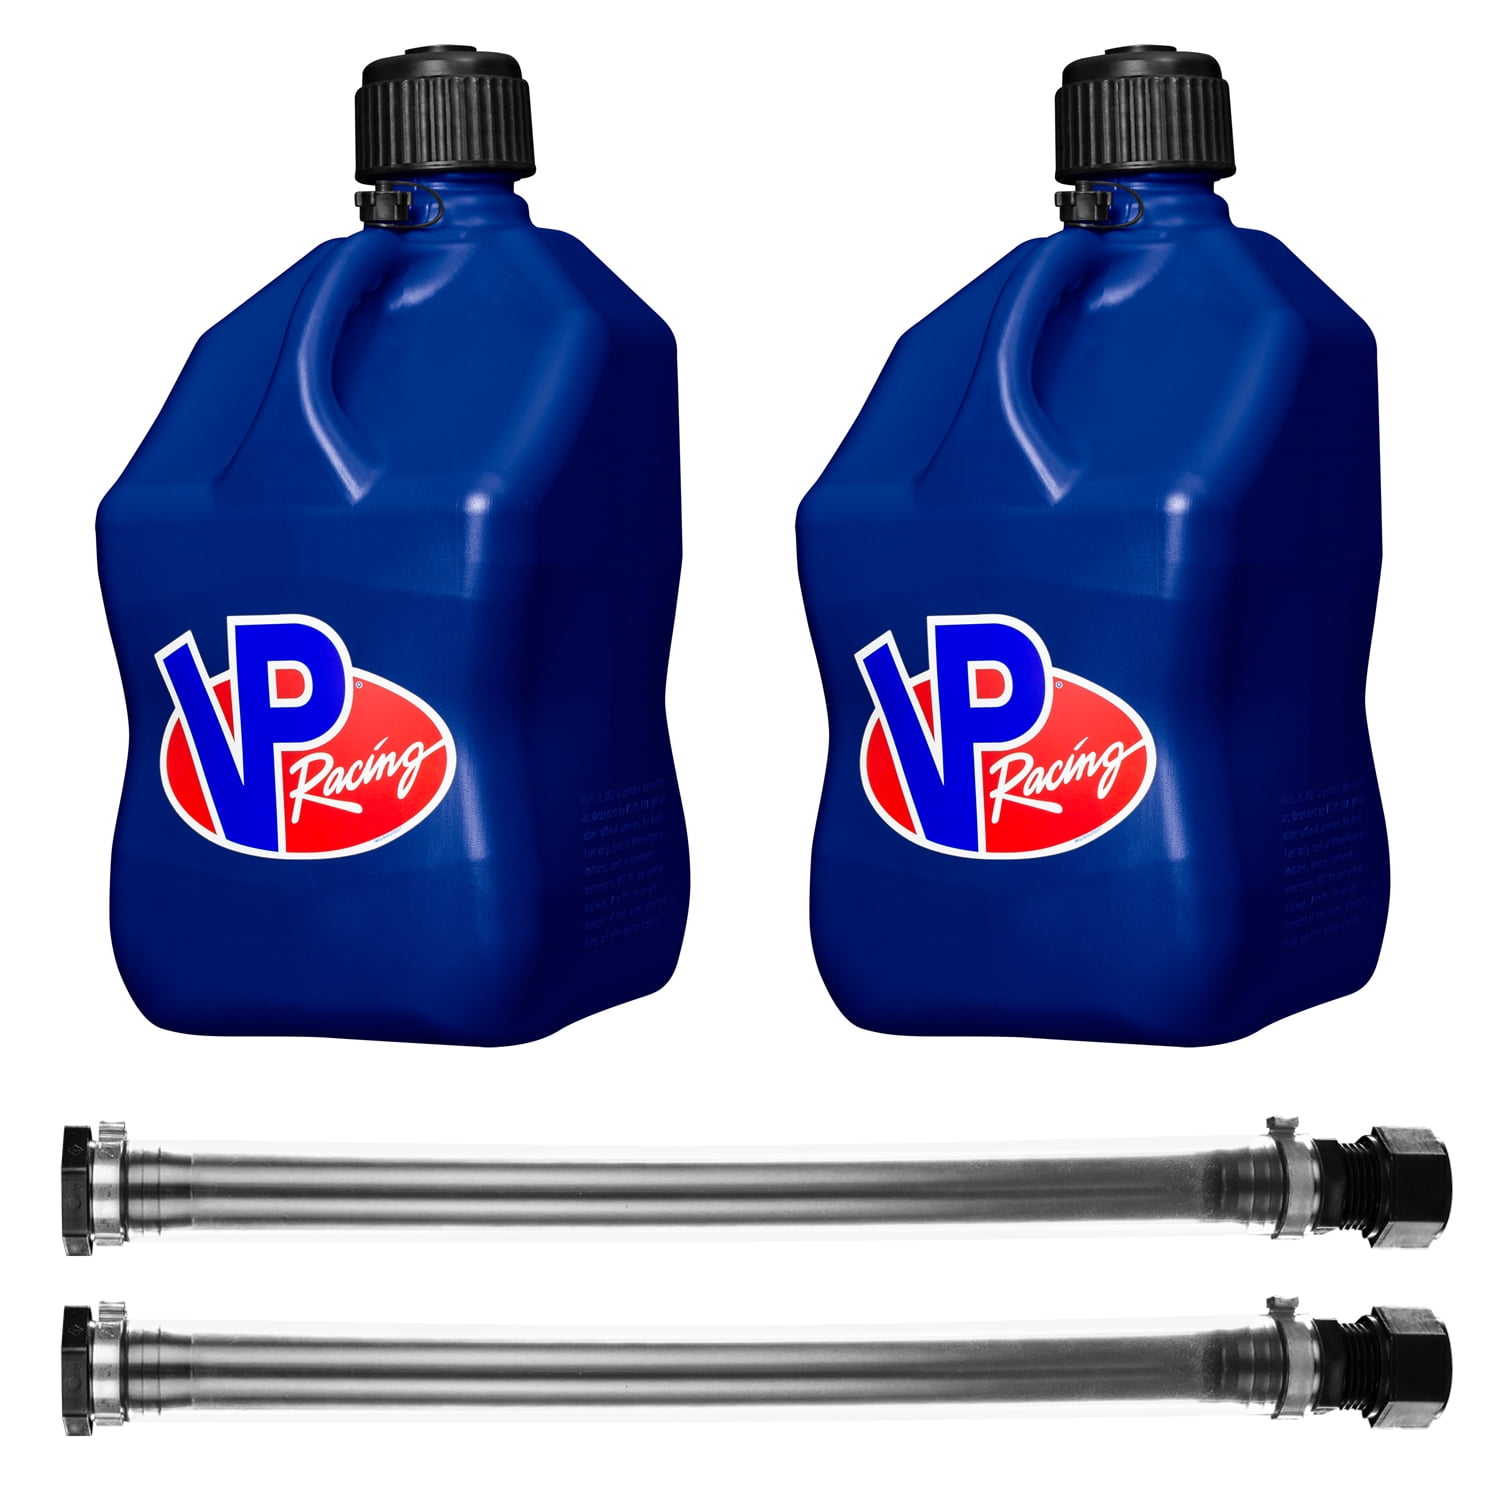 VP Racing Fuels Jug Storage 5-Gallon Container 2 Pack Blue & Hose 2 Pack